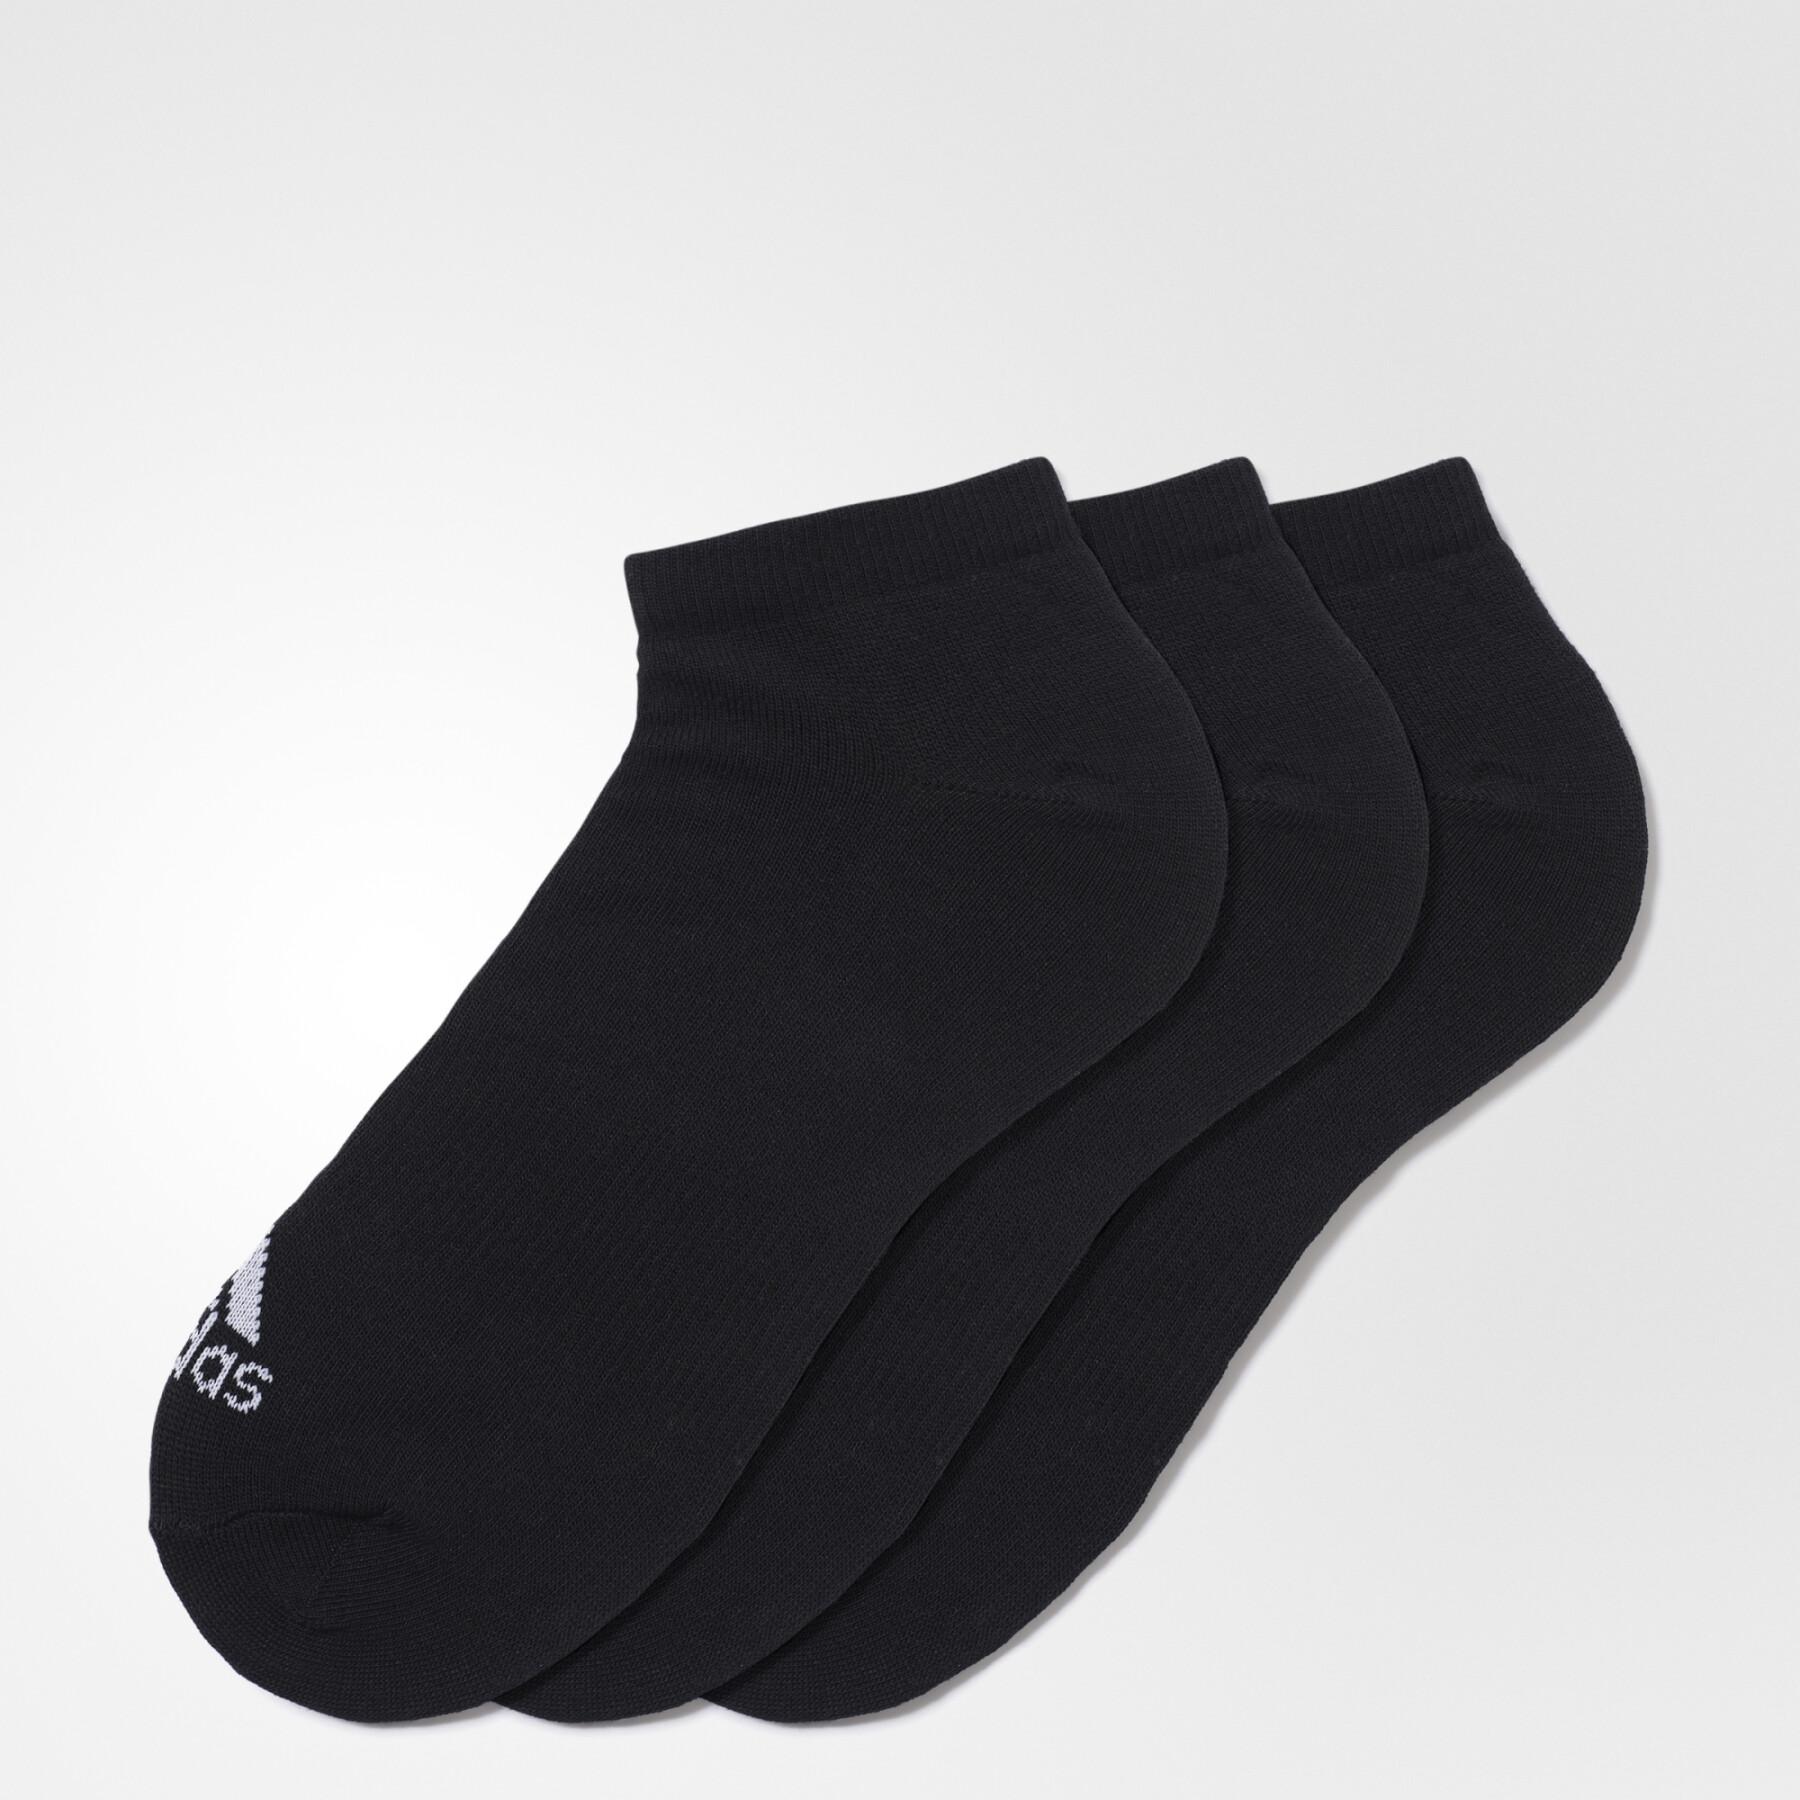 Calcetines finos adidas invisibles Performance (lot de 3 paires)